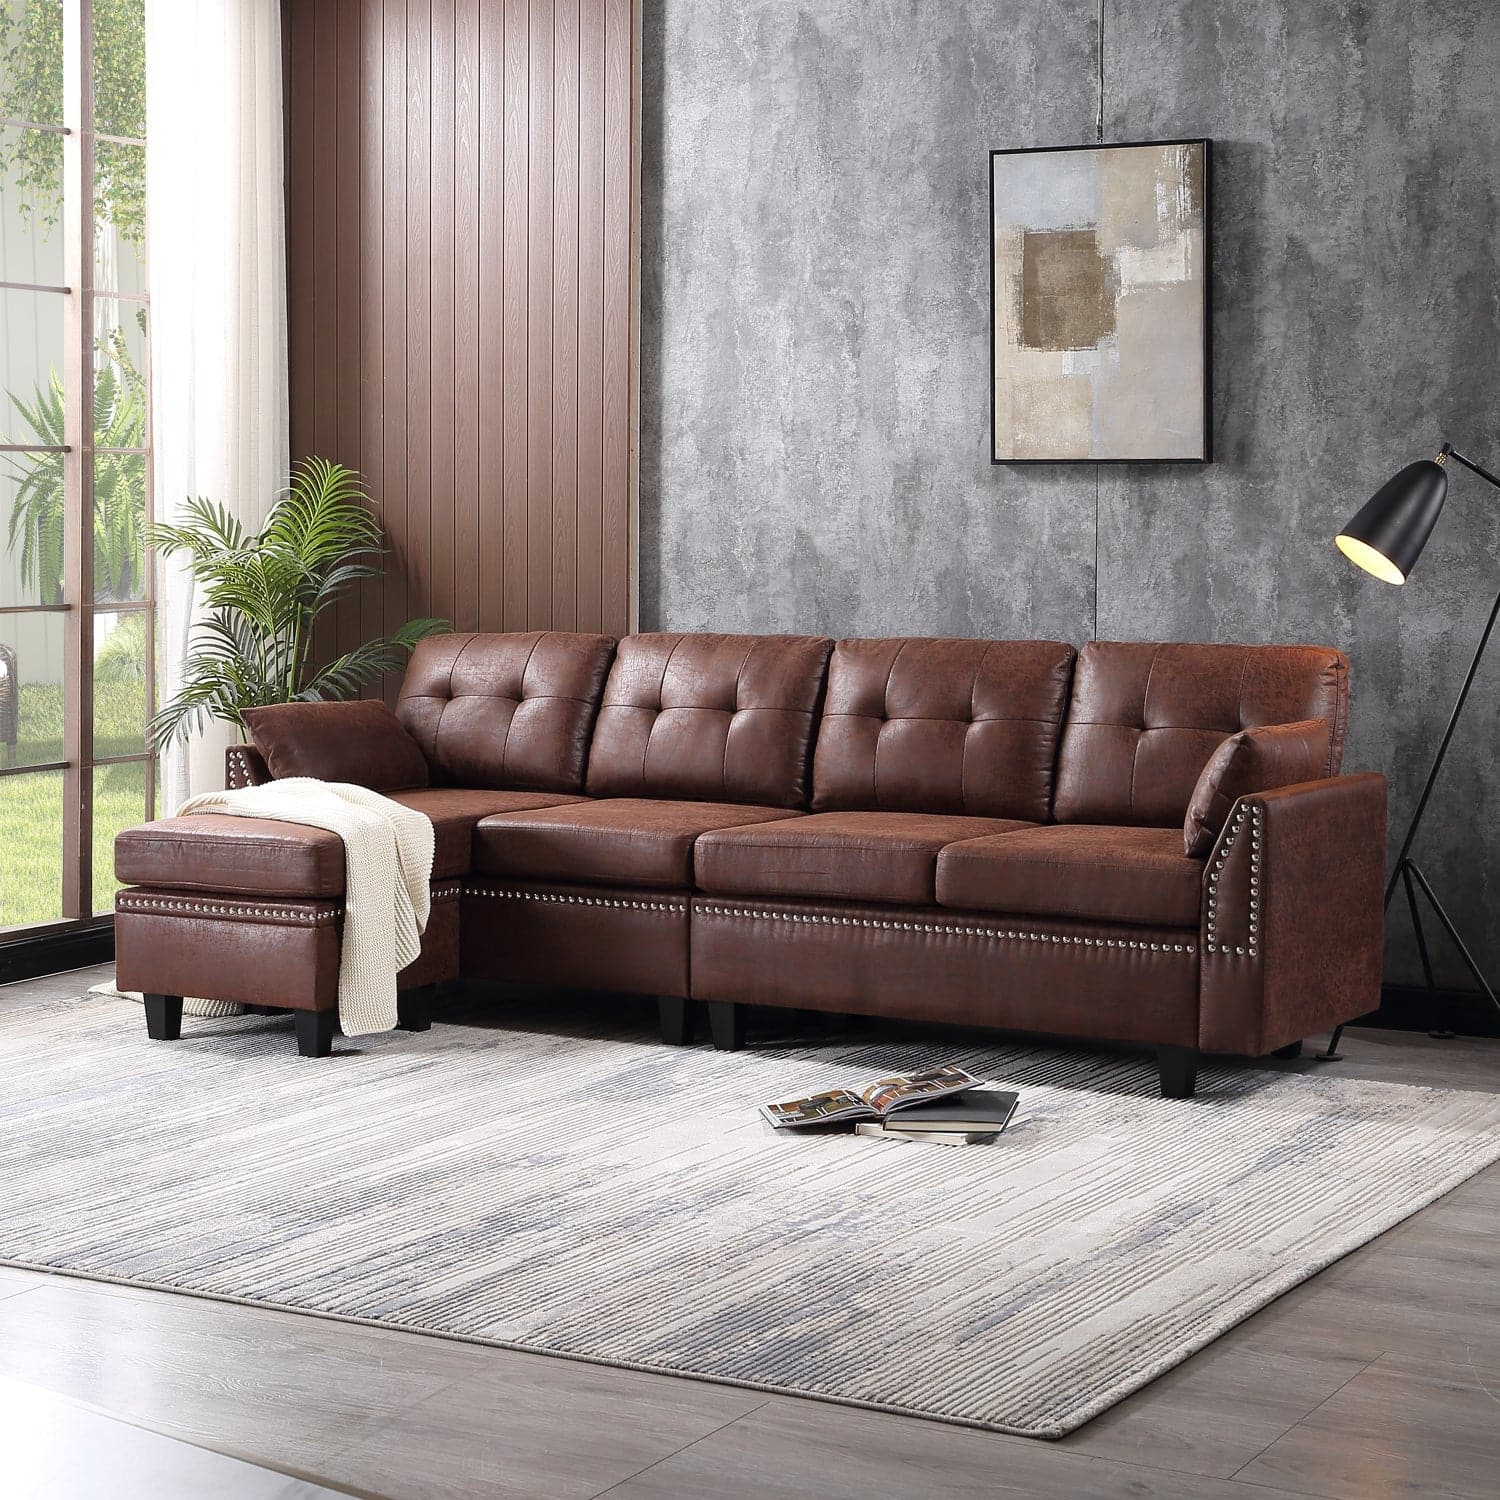 Ovios Living Room 98.42" Wide Flared Arm Suede Fabric or Leathair L Shaped Sofa with Ottoman-Dark Brown